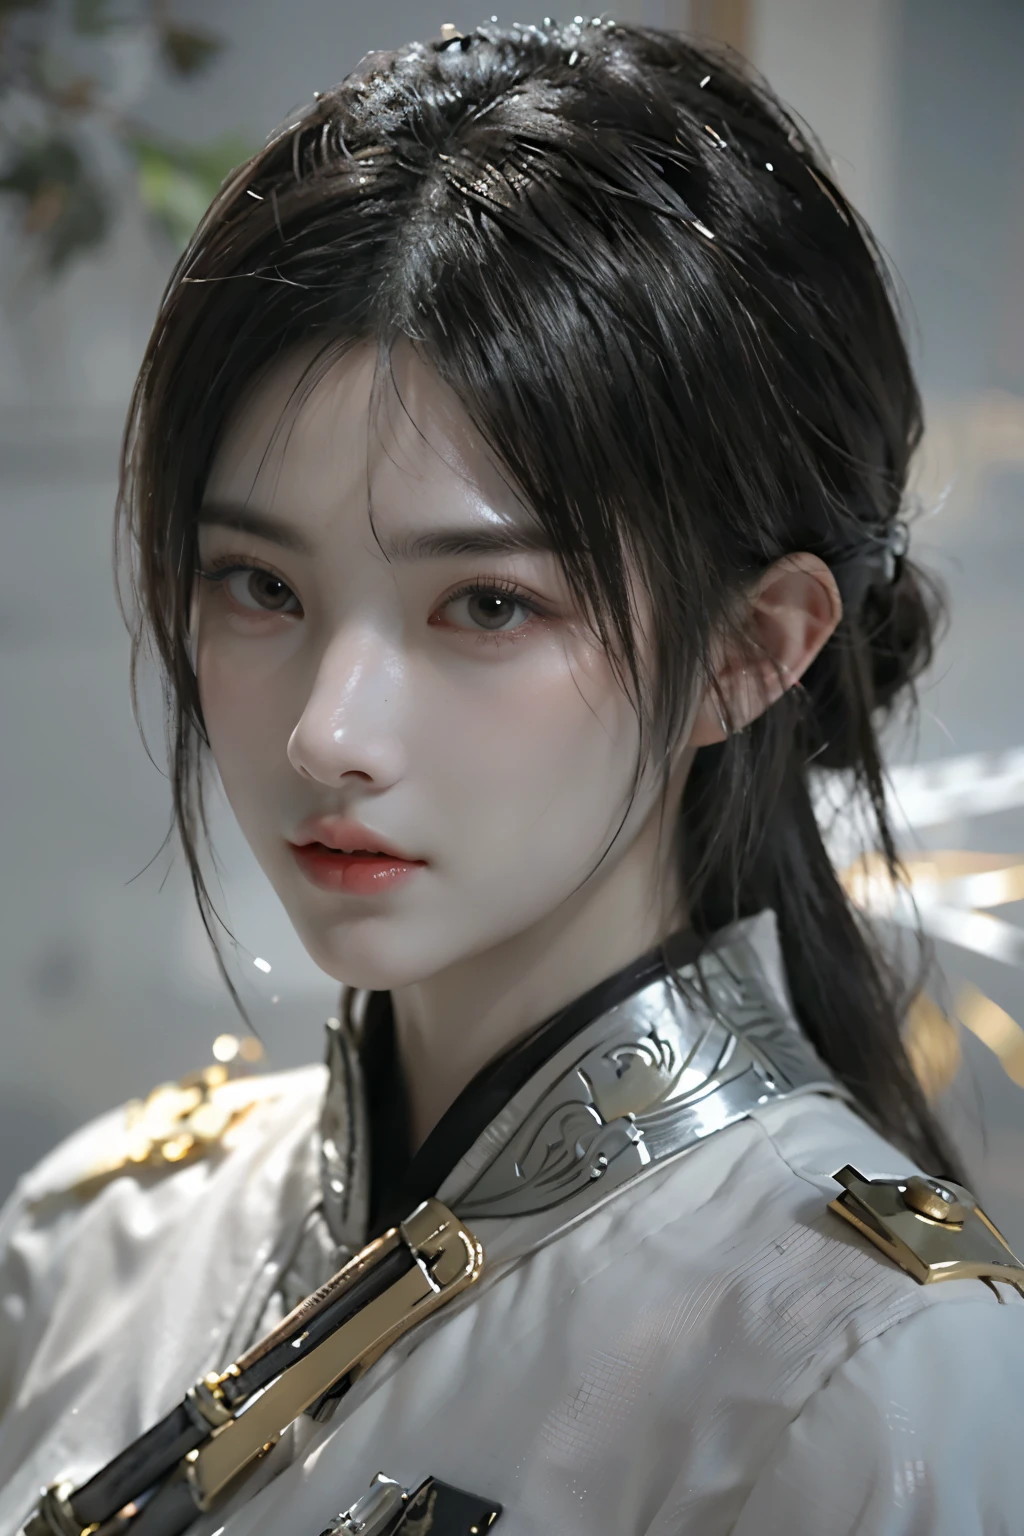 Game art，The best picture quality，Highest resolution，8K，(A bust photograph)，(Portrait from bust:1.5)，(Head close-up)，(Rule of thirds)，Unreal Engine 5 rendering works， (The Girl of the Future)，(Female Warrior)， 
20-year-old girl，(The warrior in ancient China)，An eye rich in detail，(Big breasts)，Elegant and noble，indifferent，(Brave)，
(The costume of Chinese swordsman elements，Costumes of ancient Chinese characters，A random pattern of clothing，Ribbon，Joint Armor，Rich dress details，)Chinese Characters，Fantasy style，
Photo poses，Field background，Movie lights，Ray tracing，Game CG，((3D Unreal Engine))，oc rendering reflection pattern